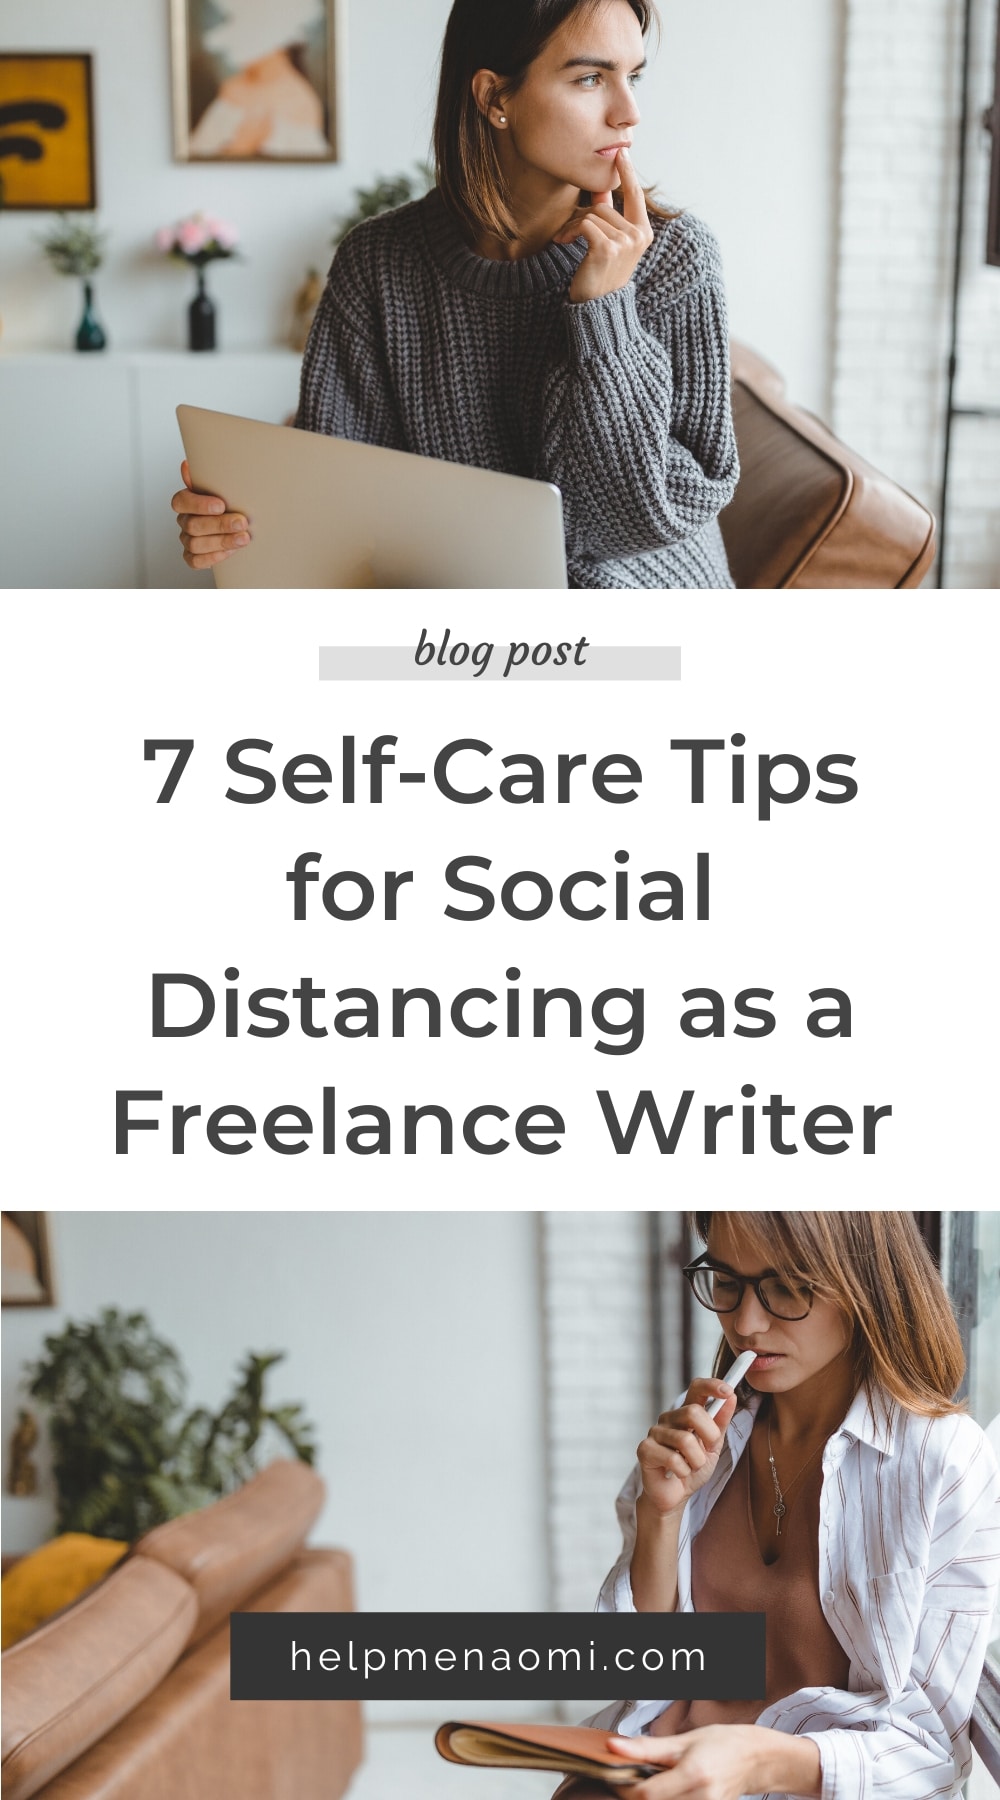 7 Self-Care Tips for Social Distancing as a Freelance Writer blog title overlay